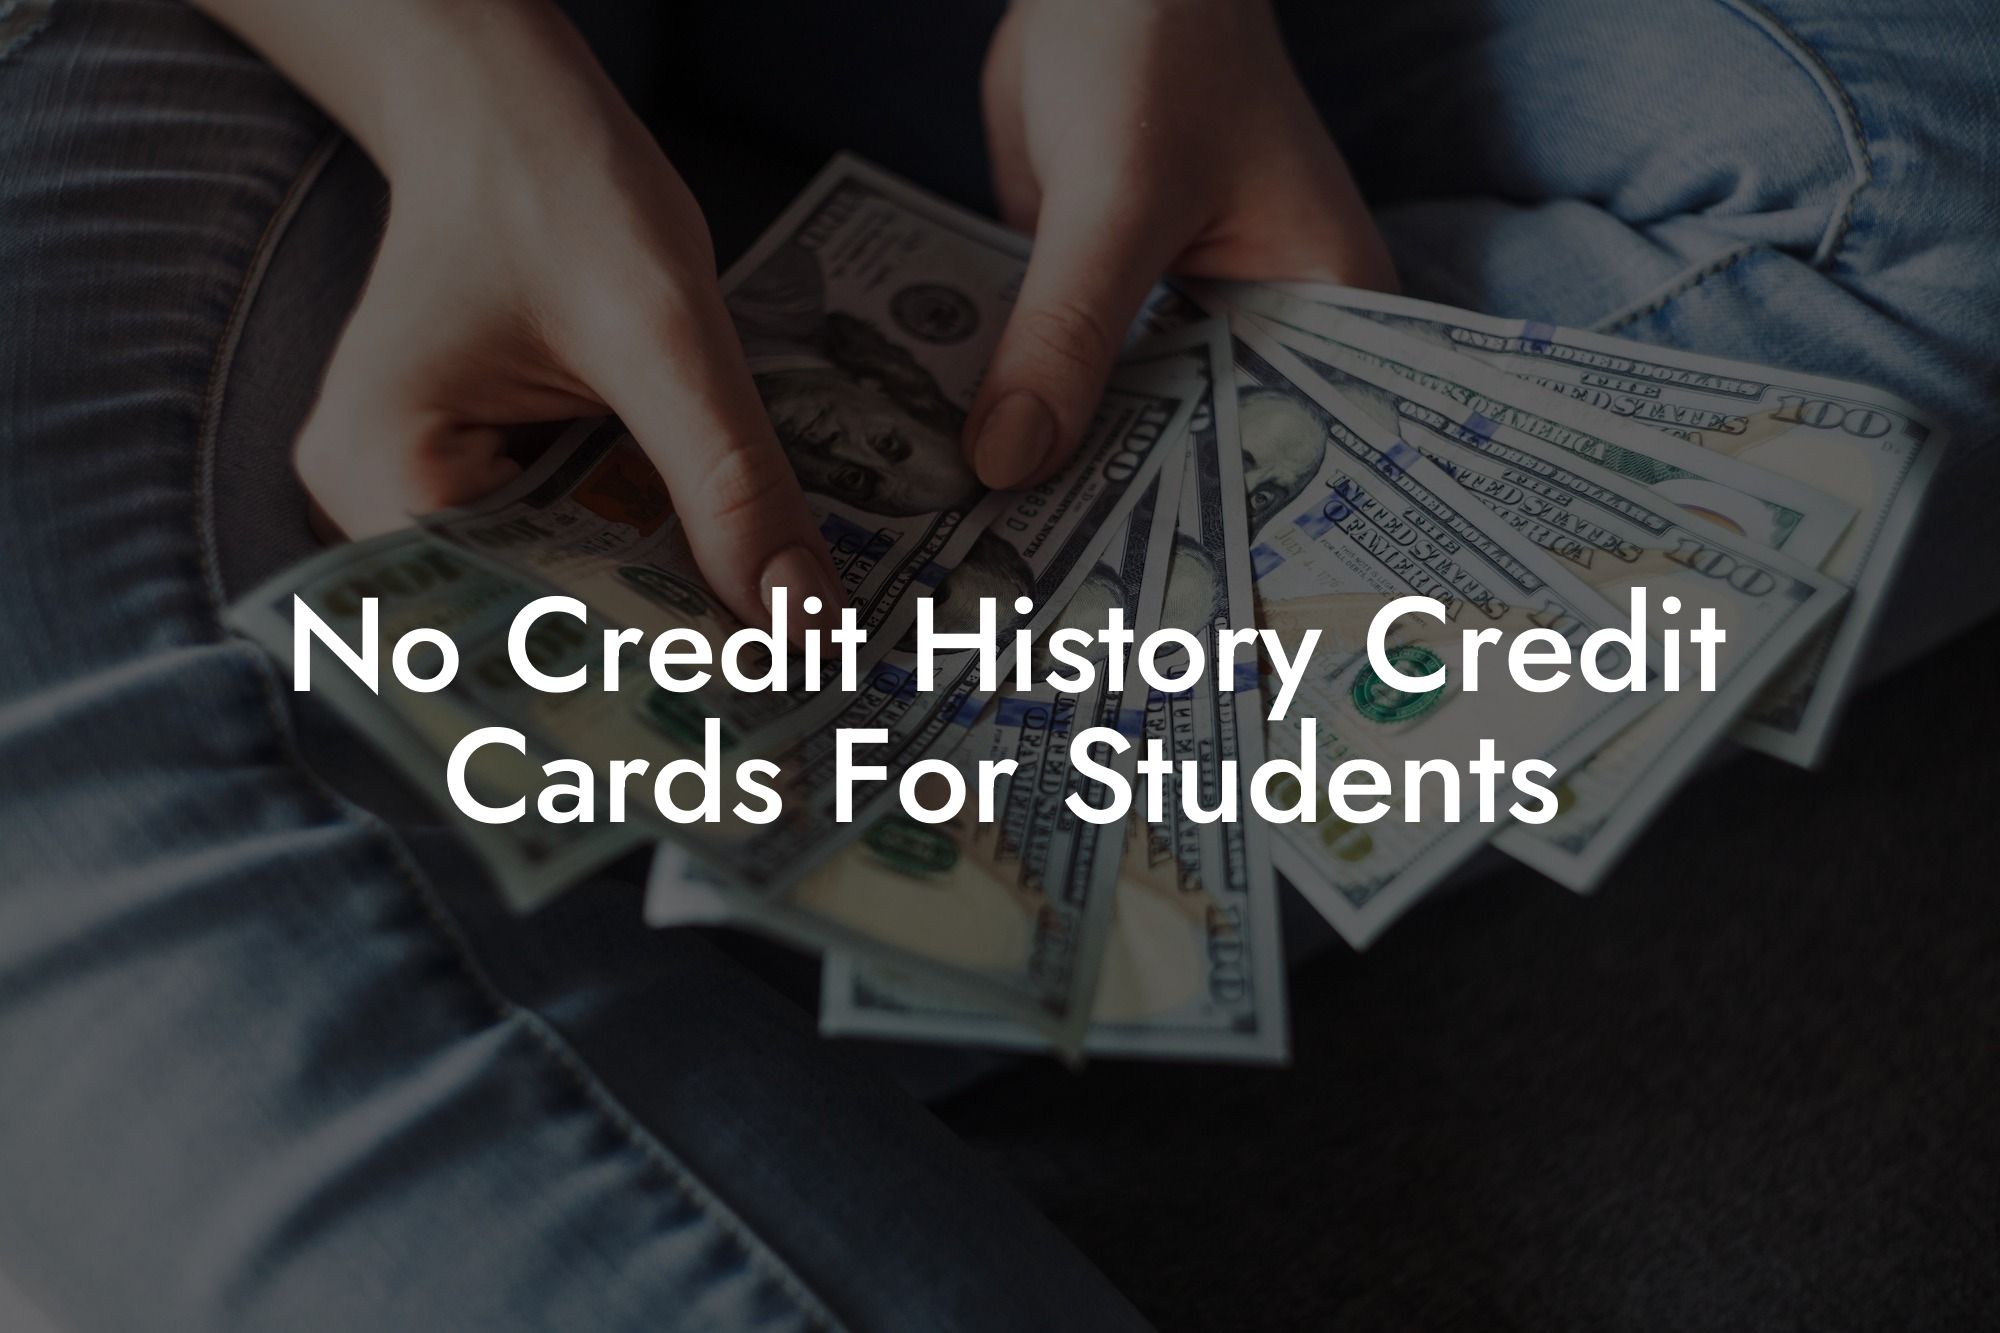 No Credit History Credit Cards For Students